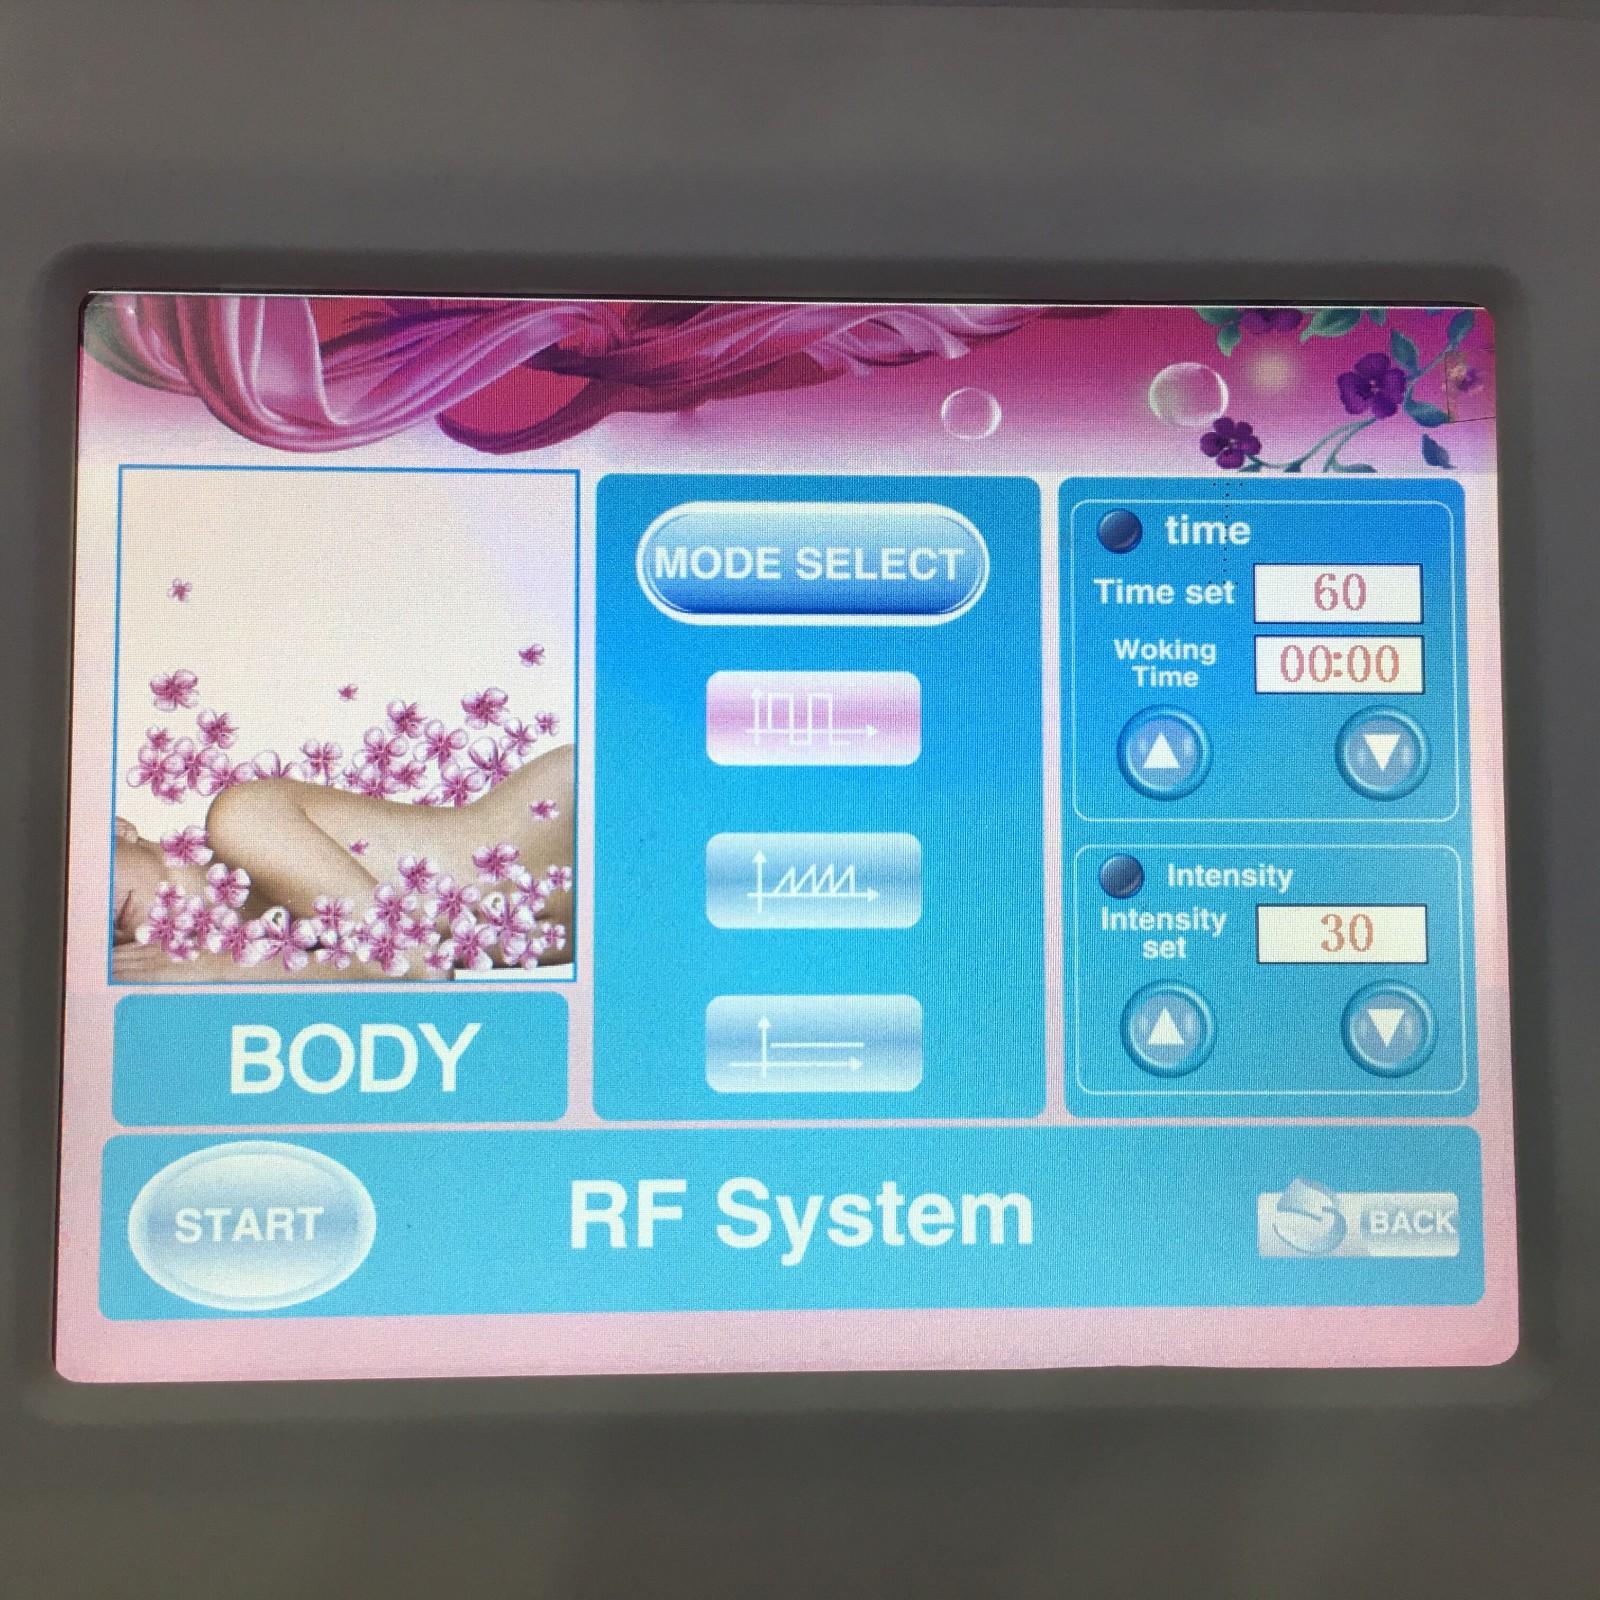 focused strawberry lipo machine to buy wrinkle series for man